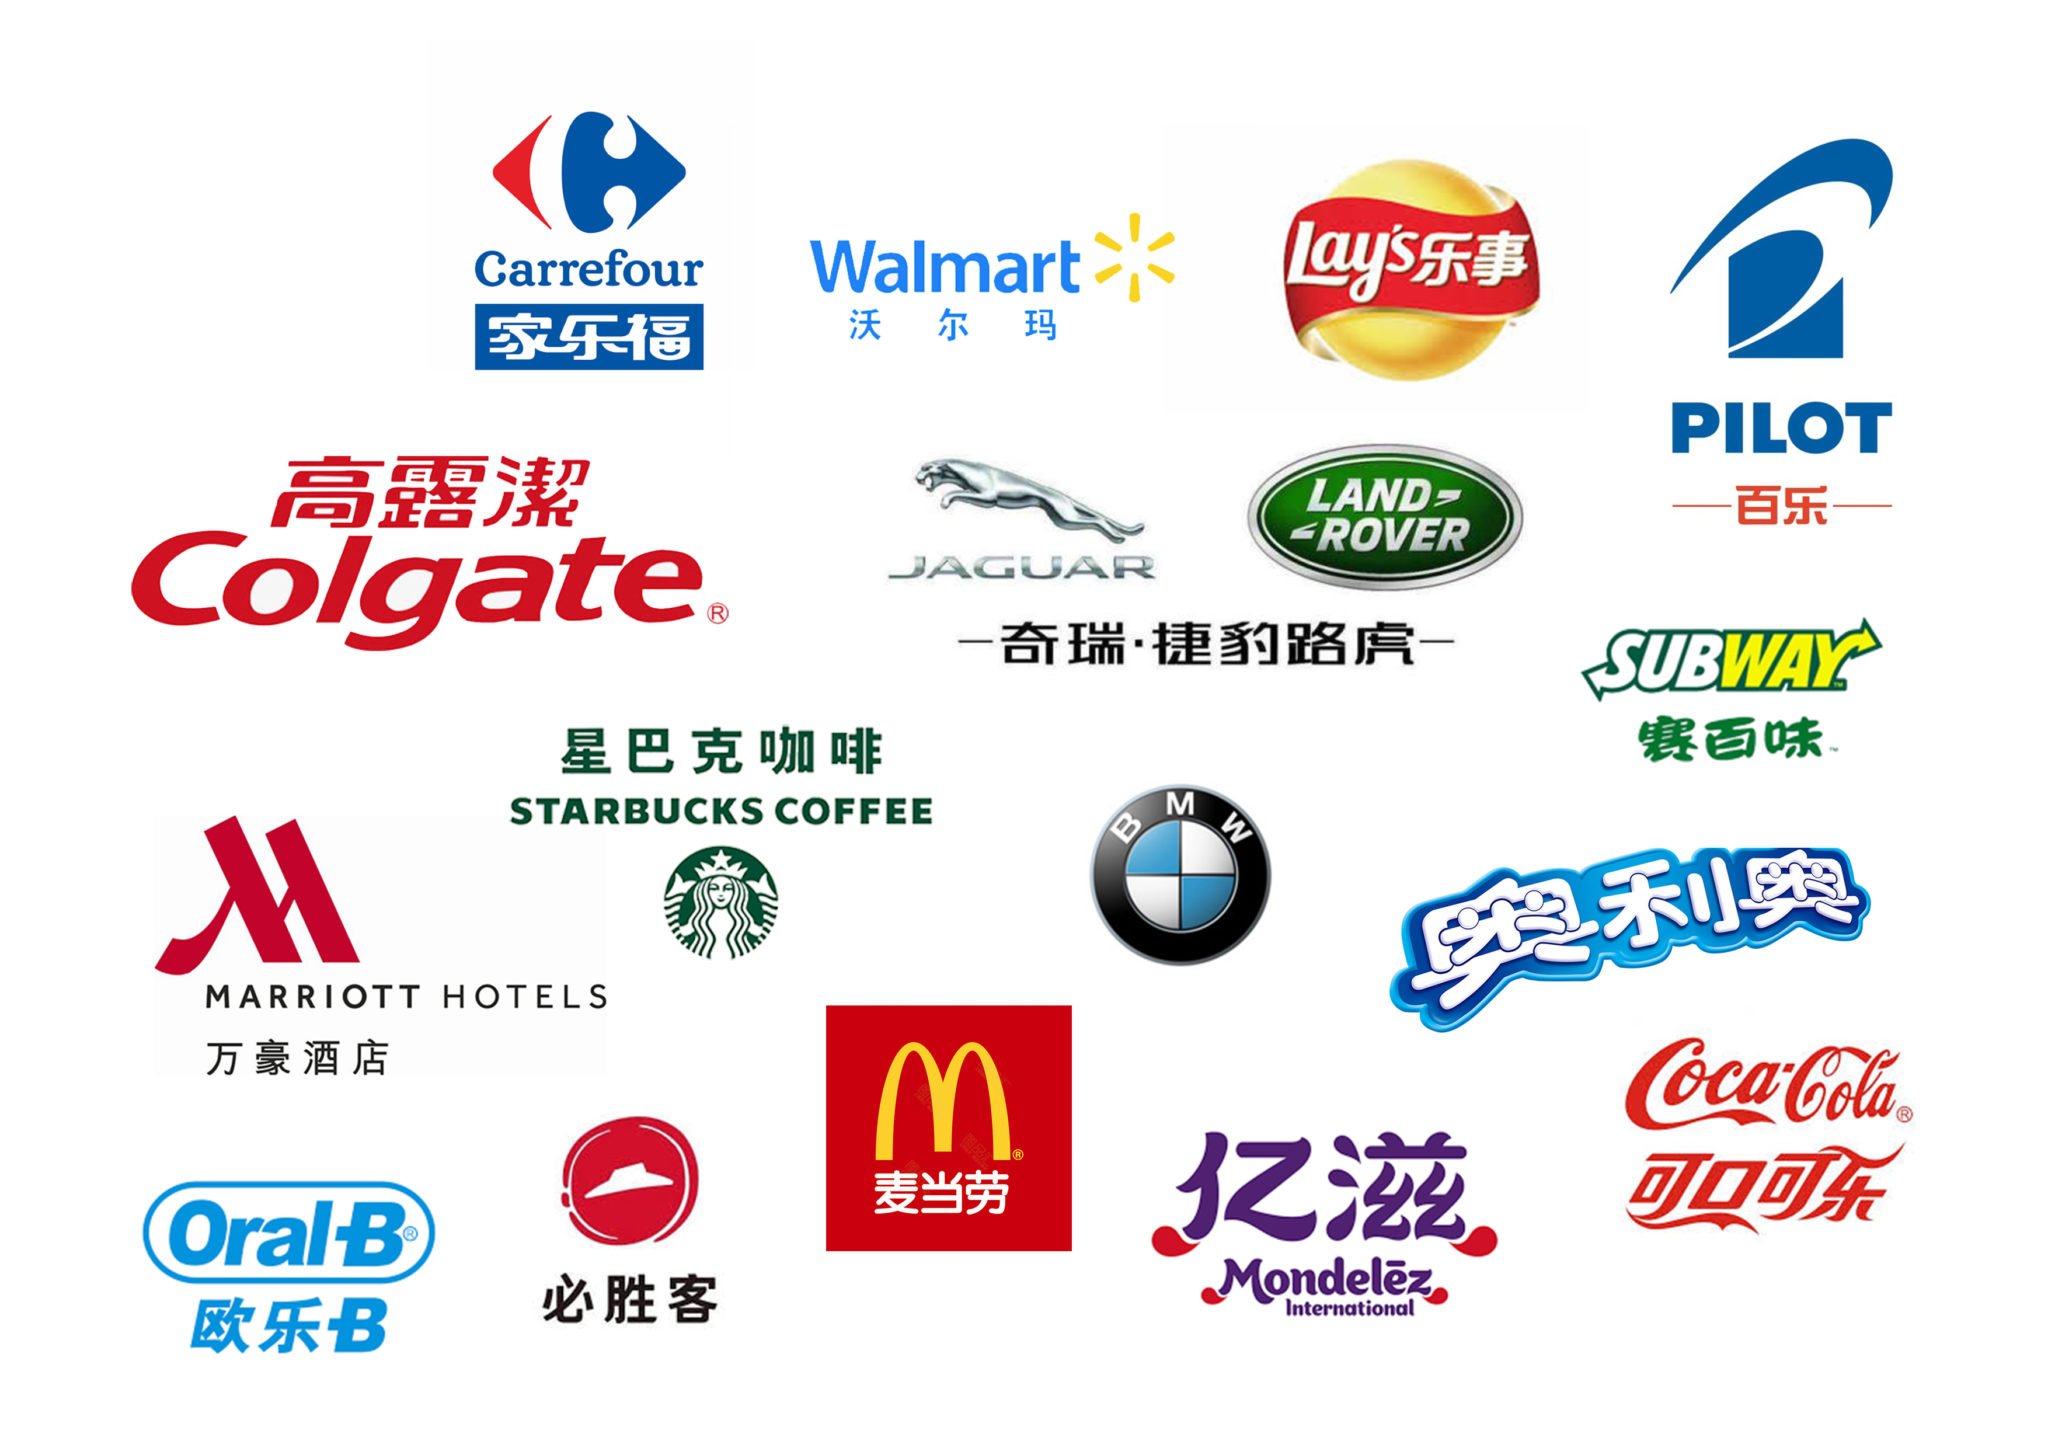 Car Brand Logos With Chinese Names